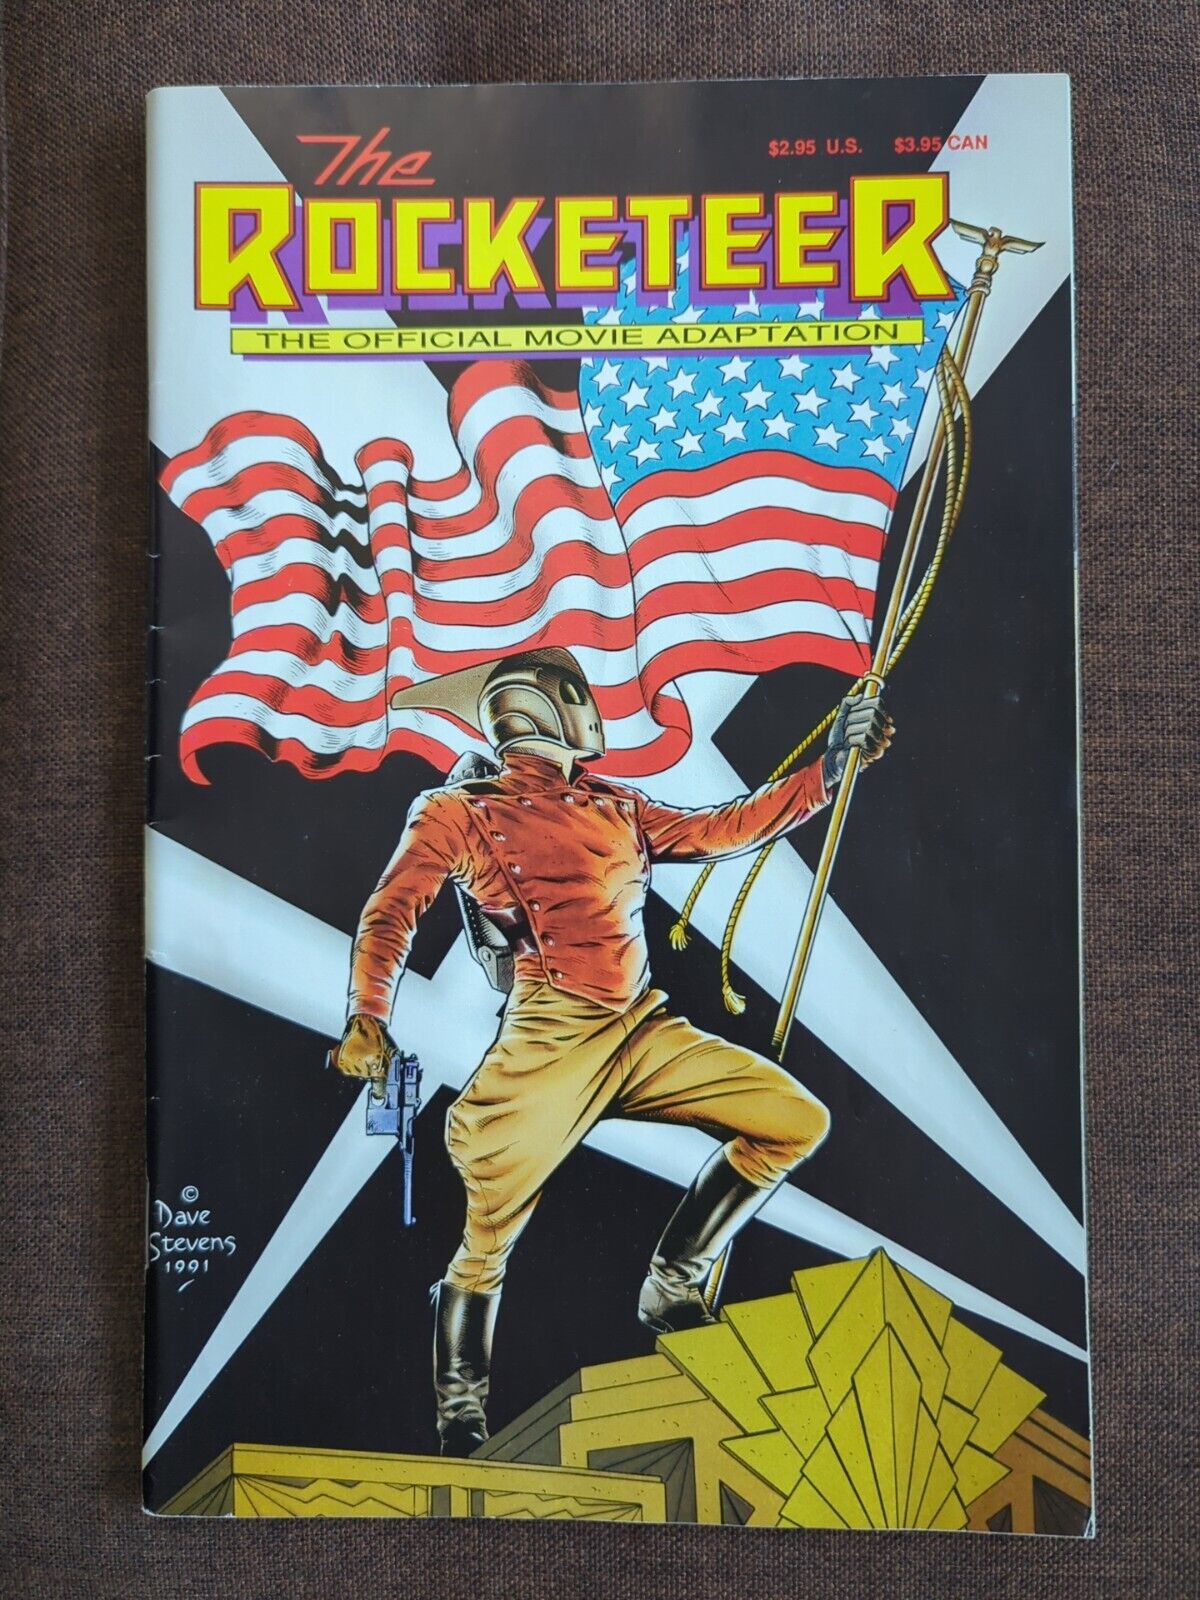 The Rocketeer Official Movie Adaptation Dave Stevens Cover Disney